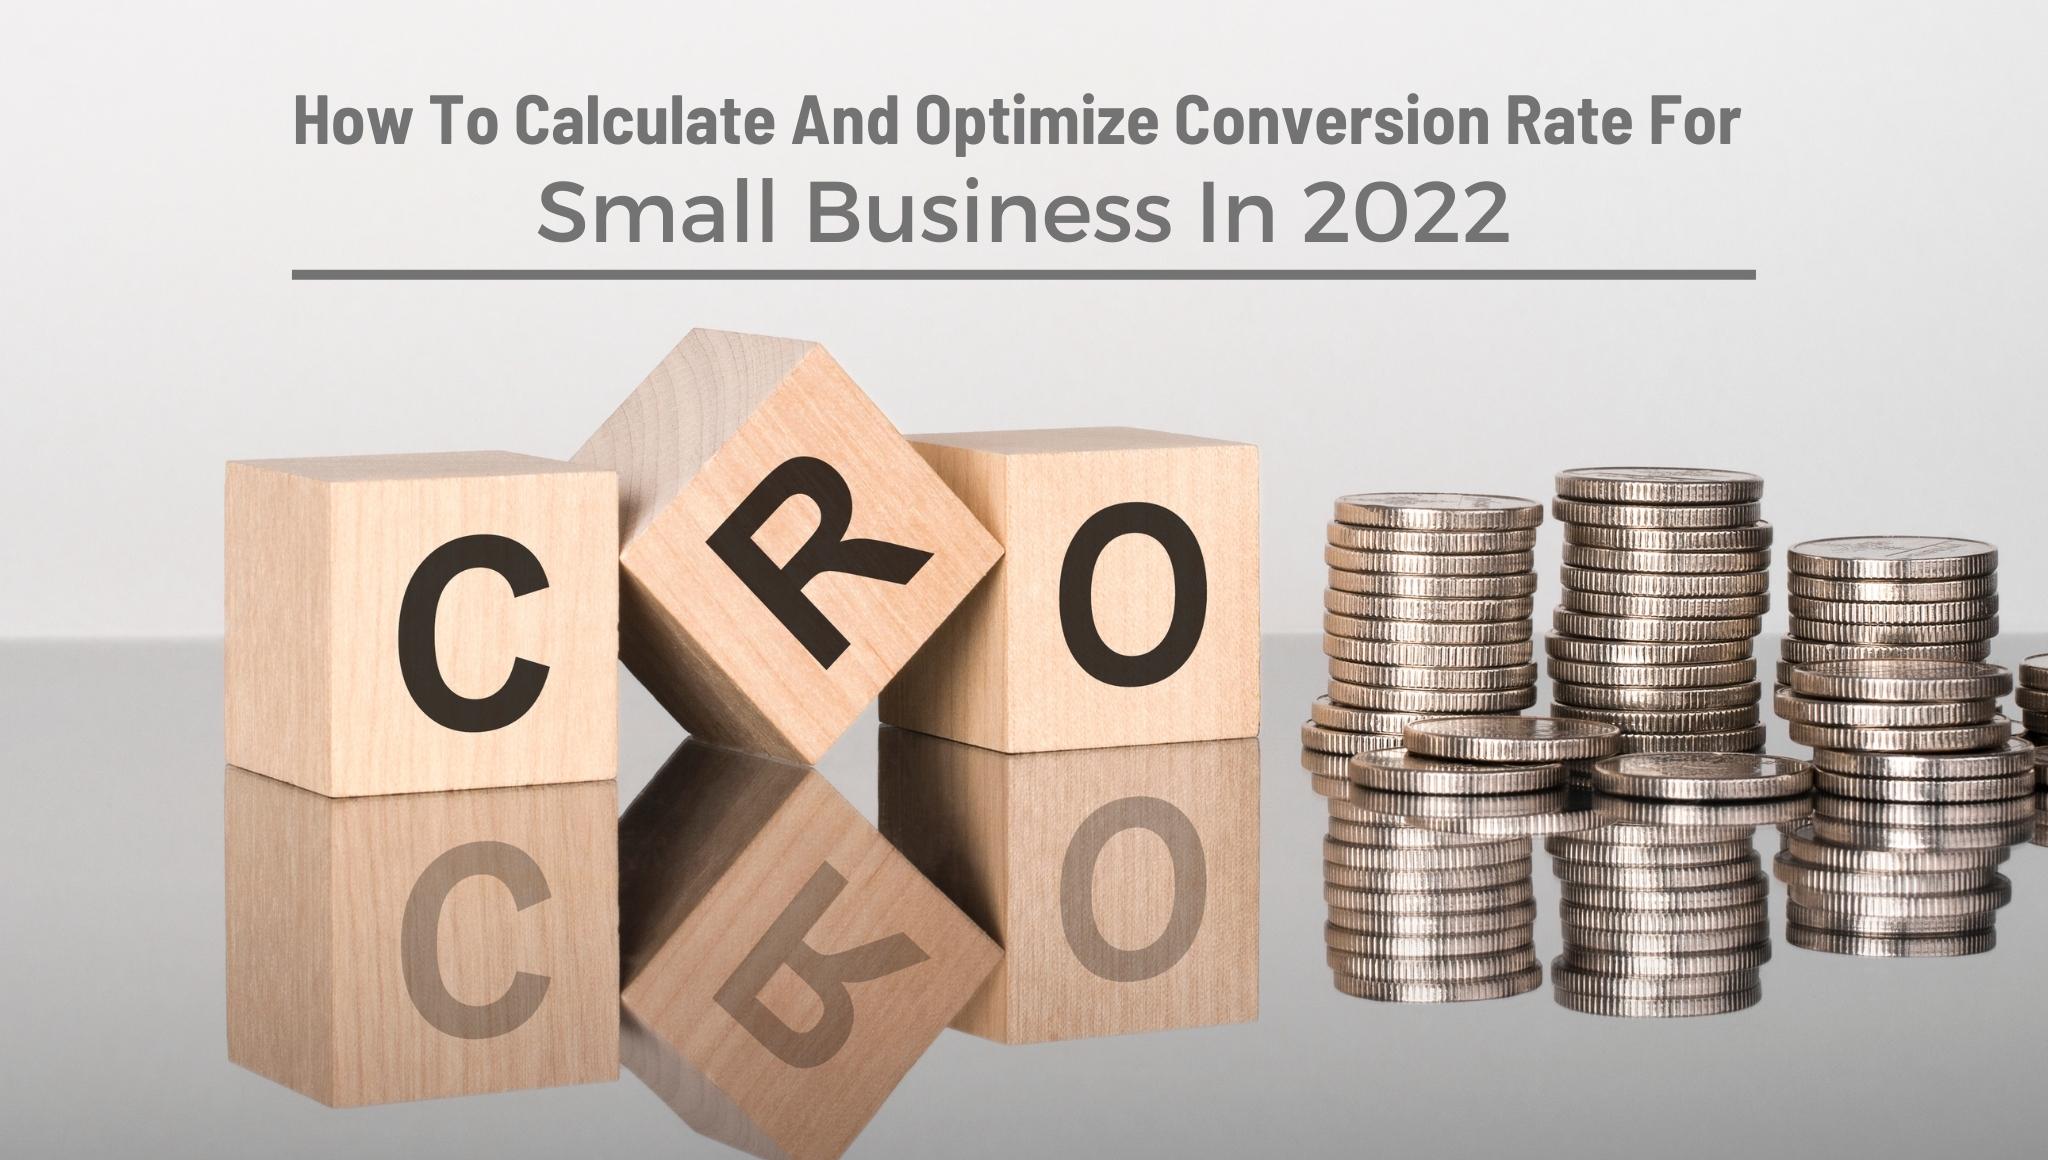 How To Calculate And Optimize Conversion Rate For Small Business In 2022